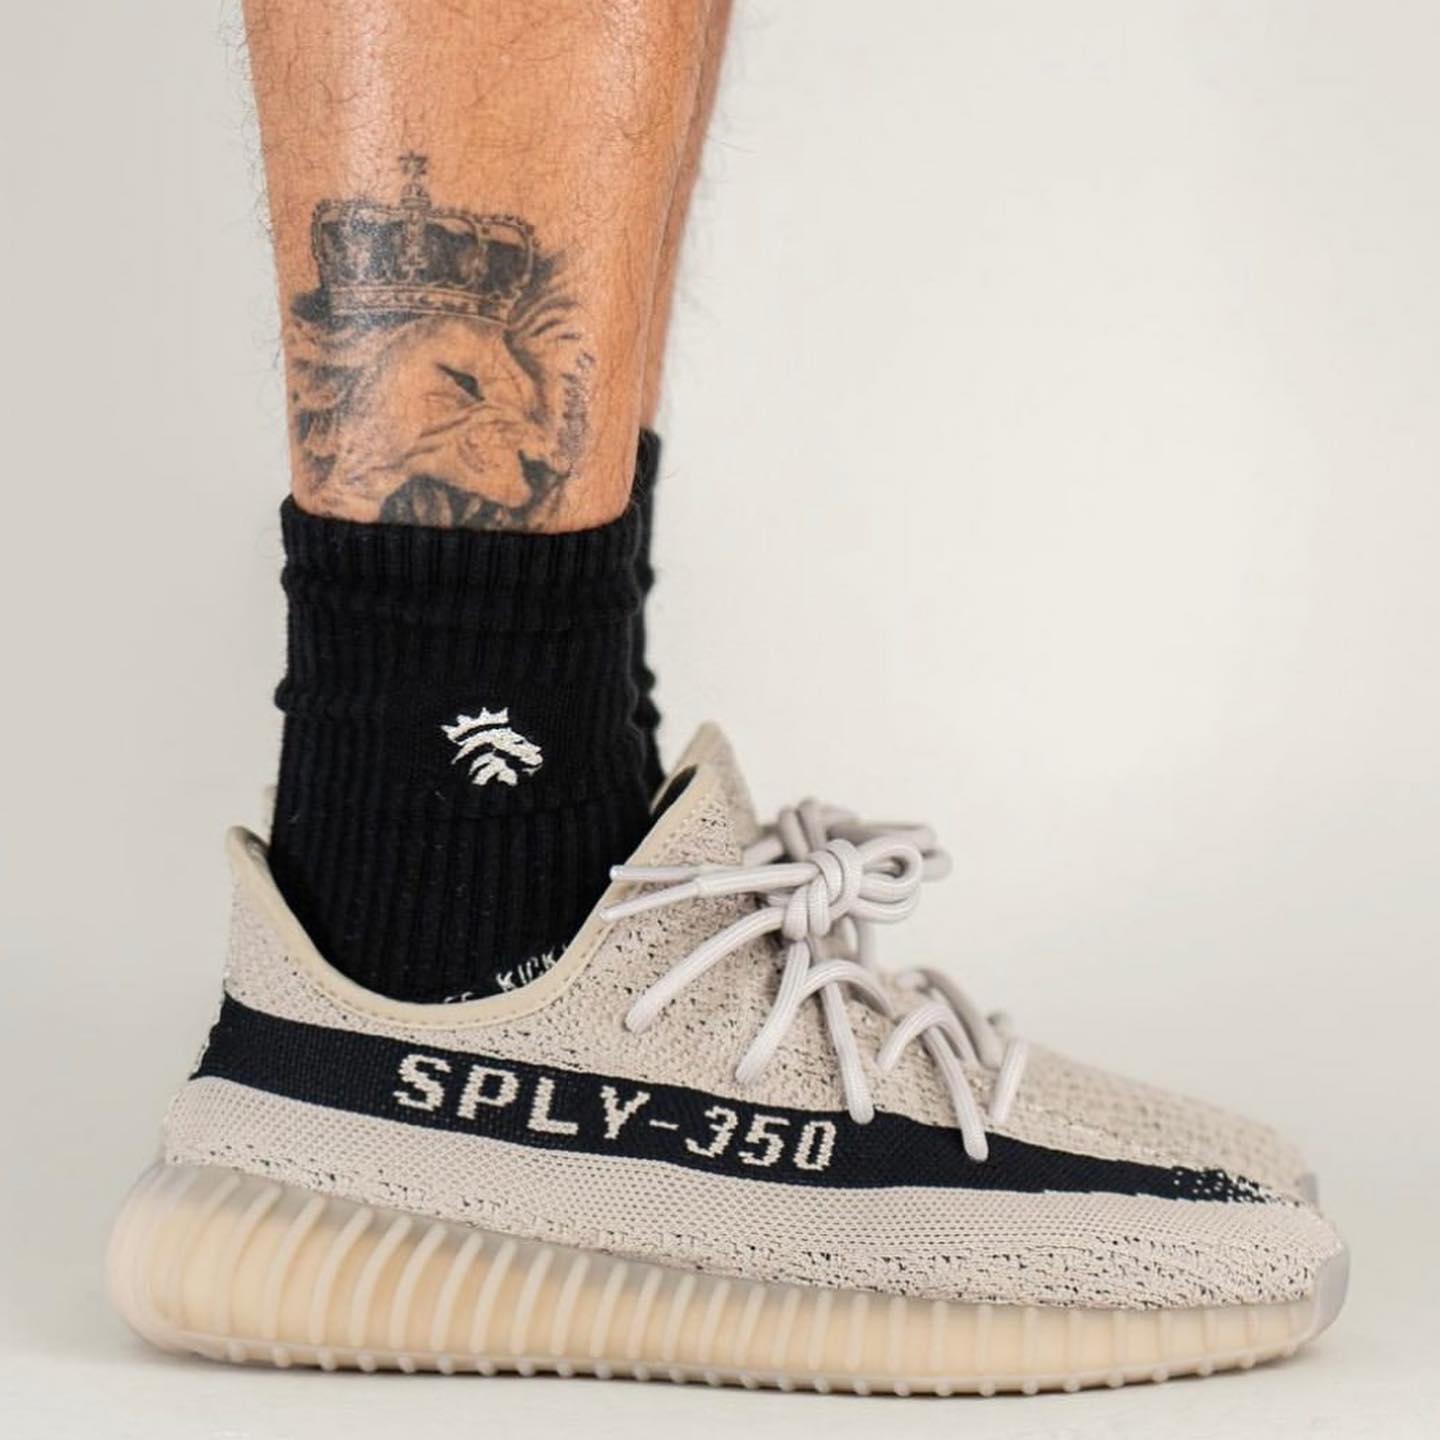 Adidas Yeezy Boost 350 V2 Sneakers Shoes